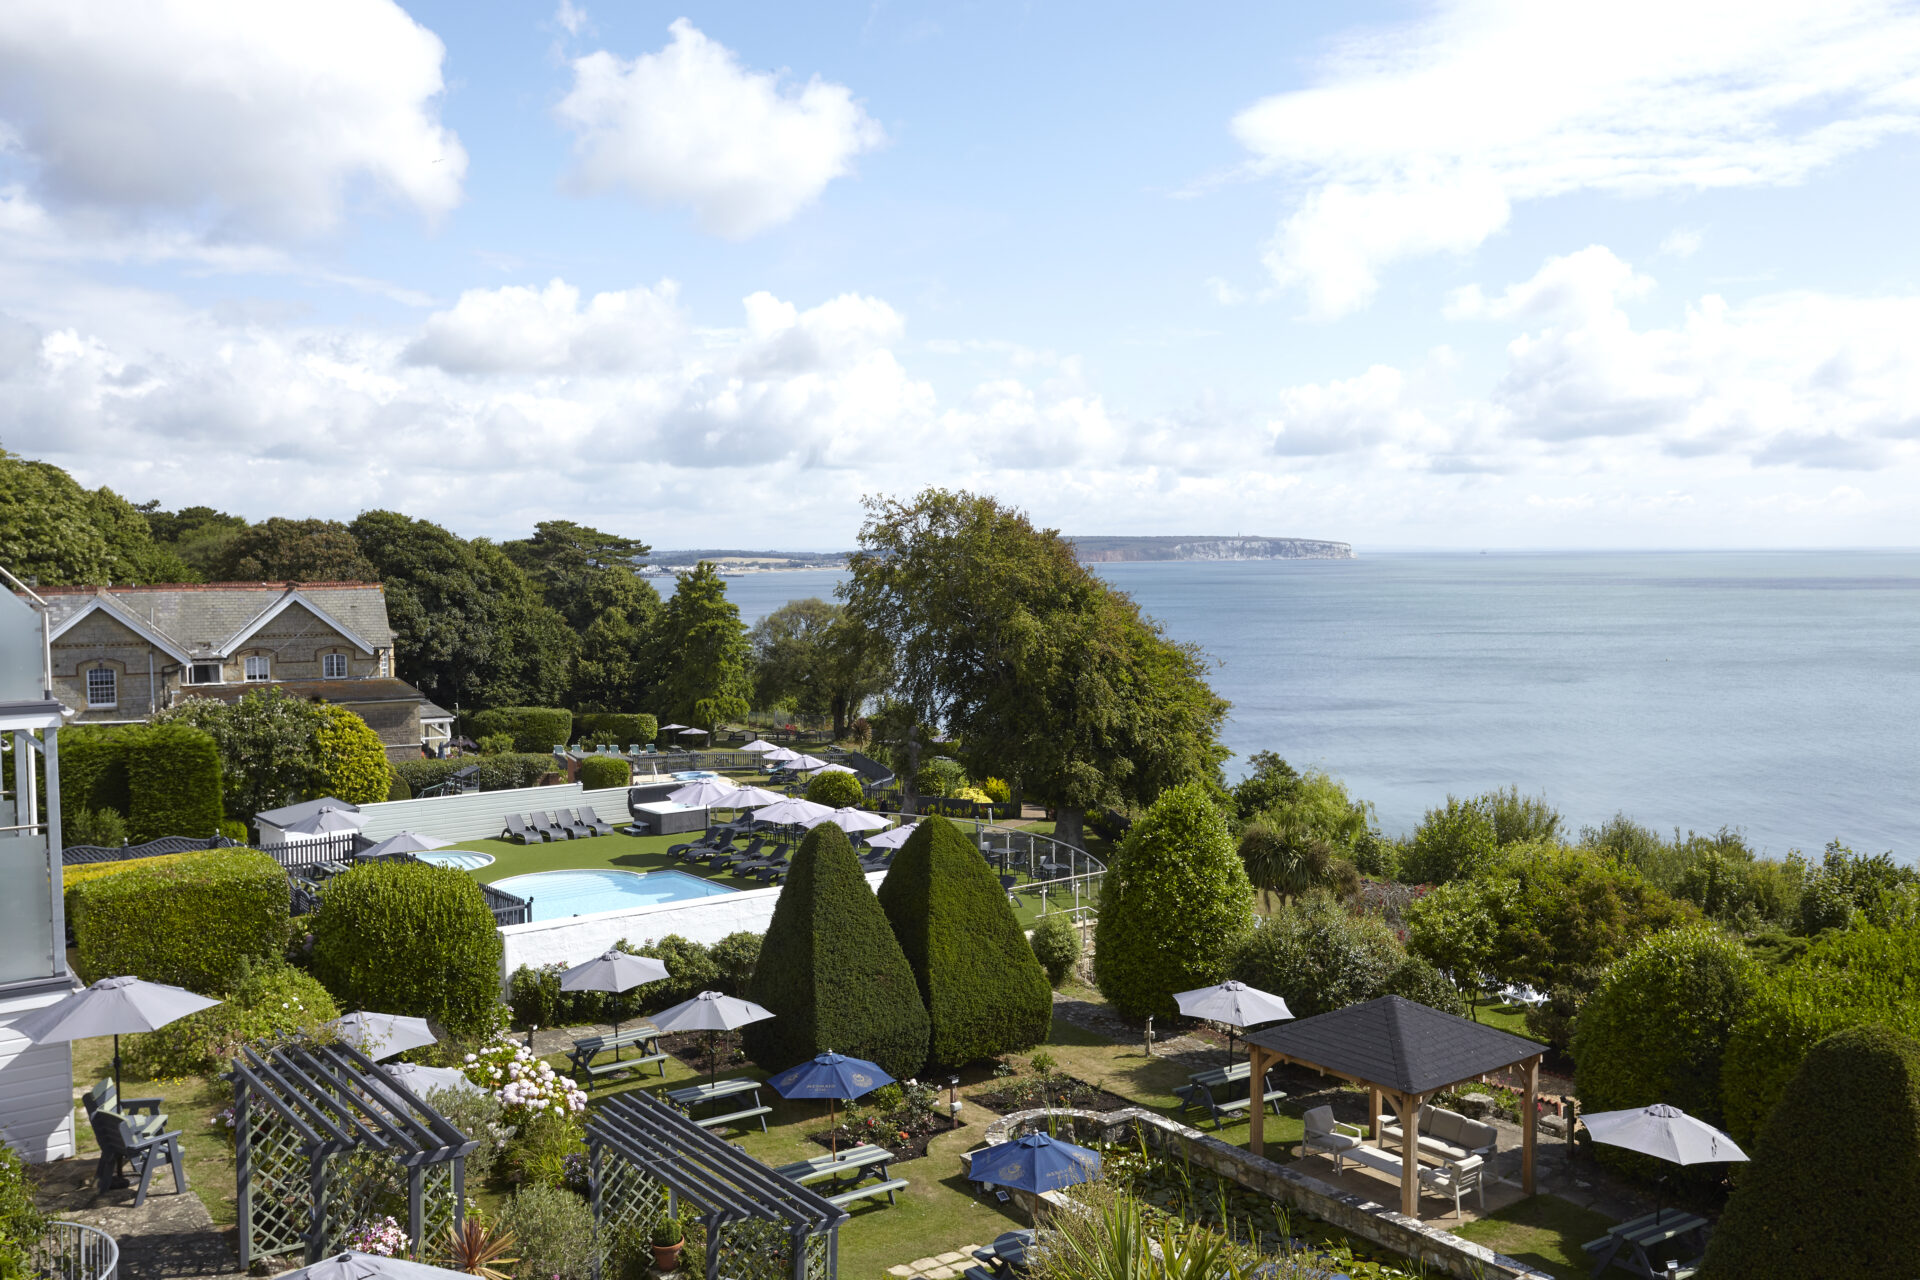 Luccombe Hall Garden and Sea View, Shanklin, Isle of Wight